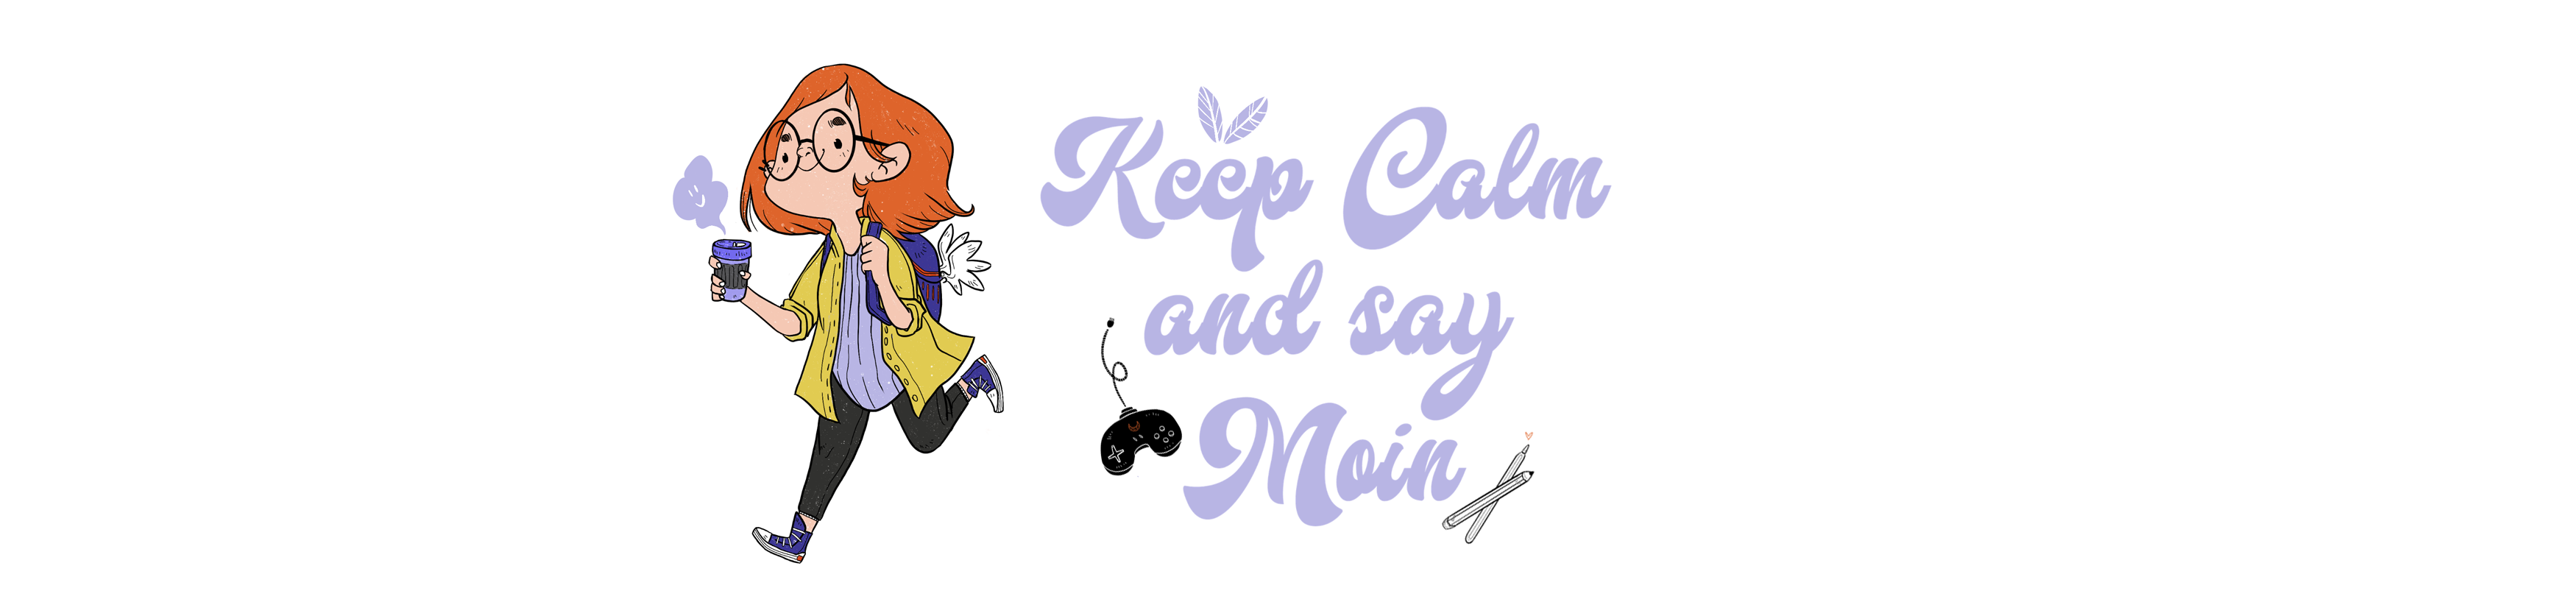 Keep Calm And Say Moin